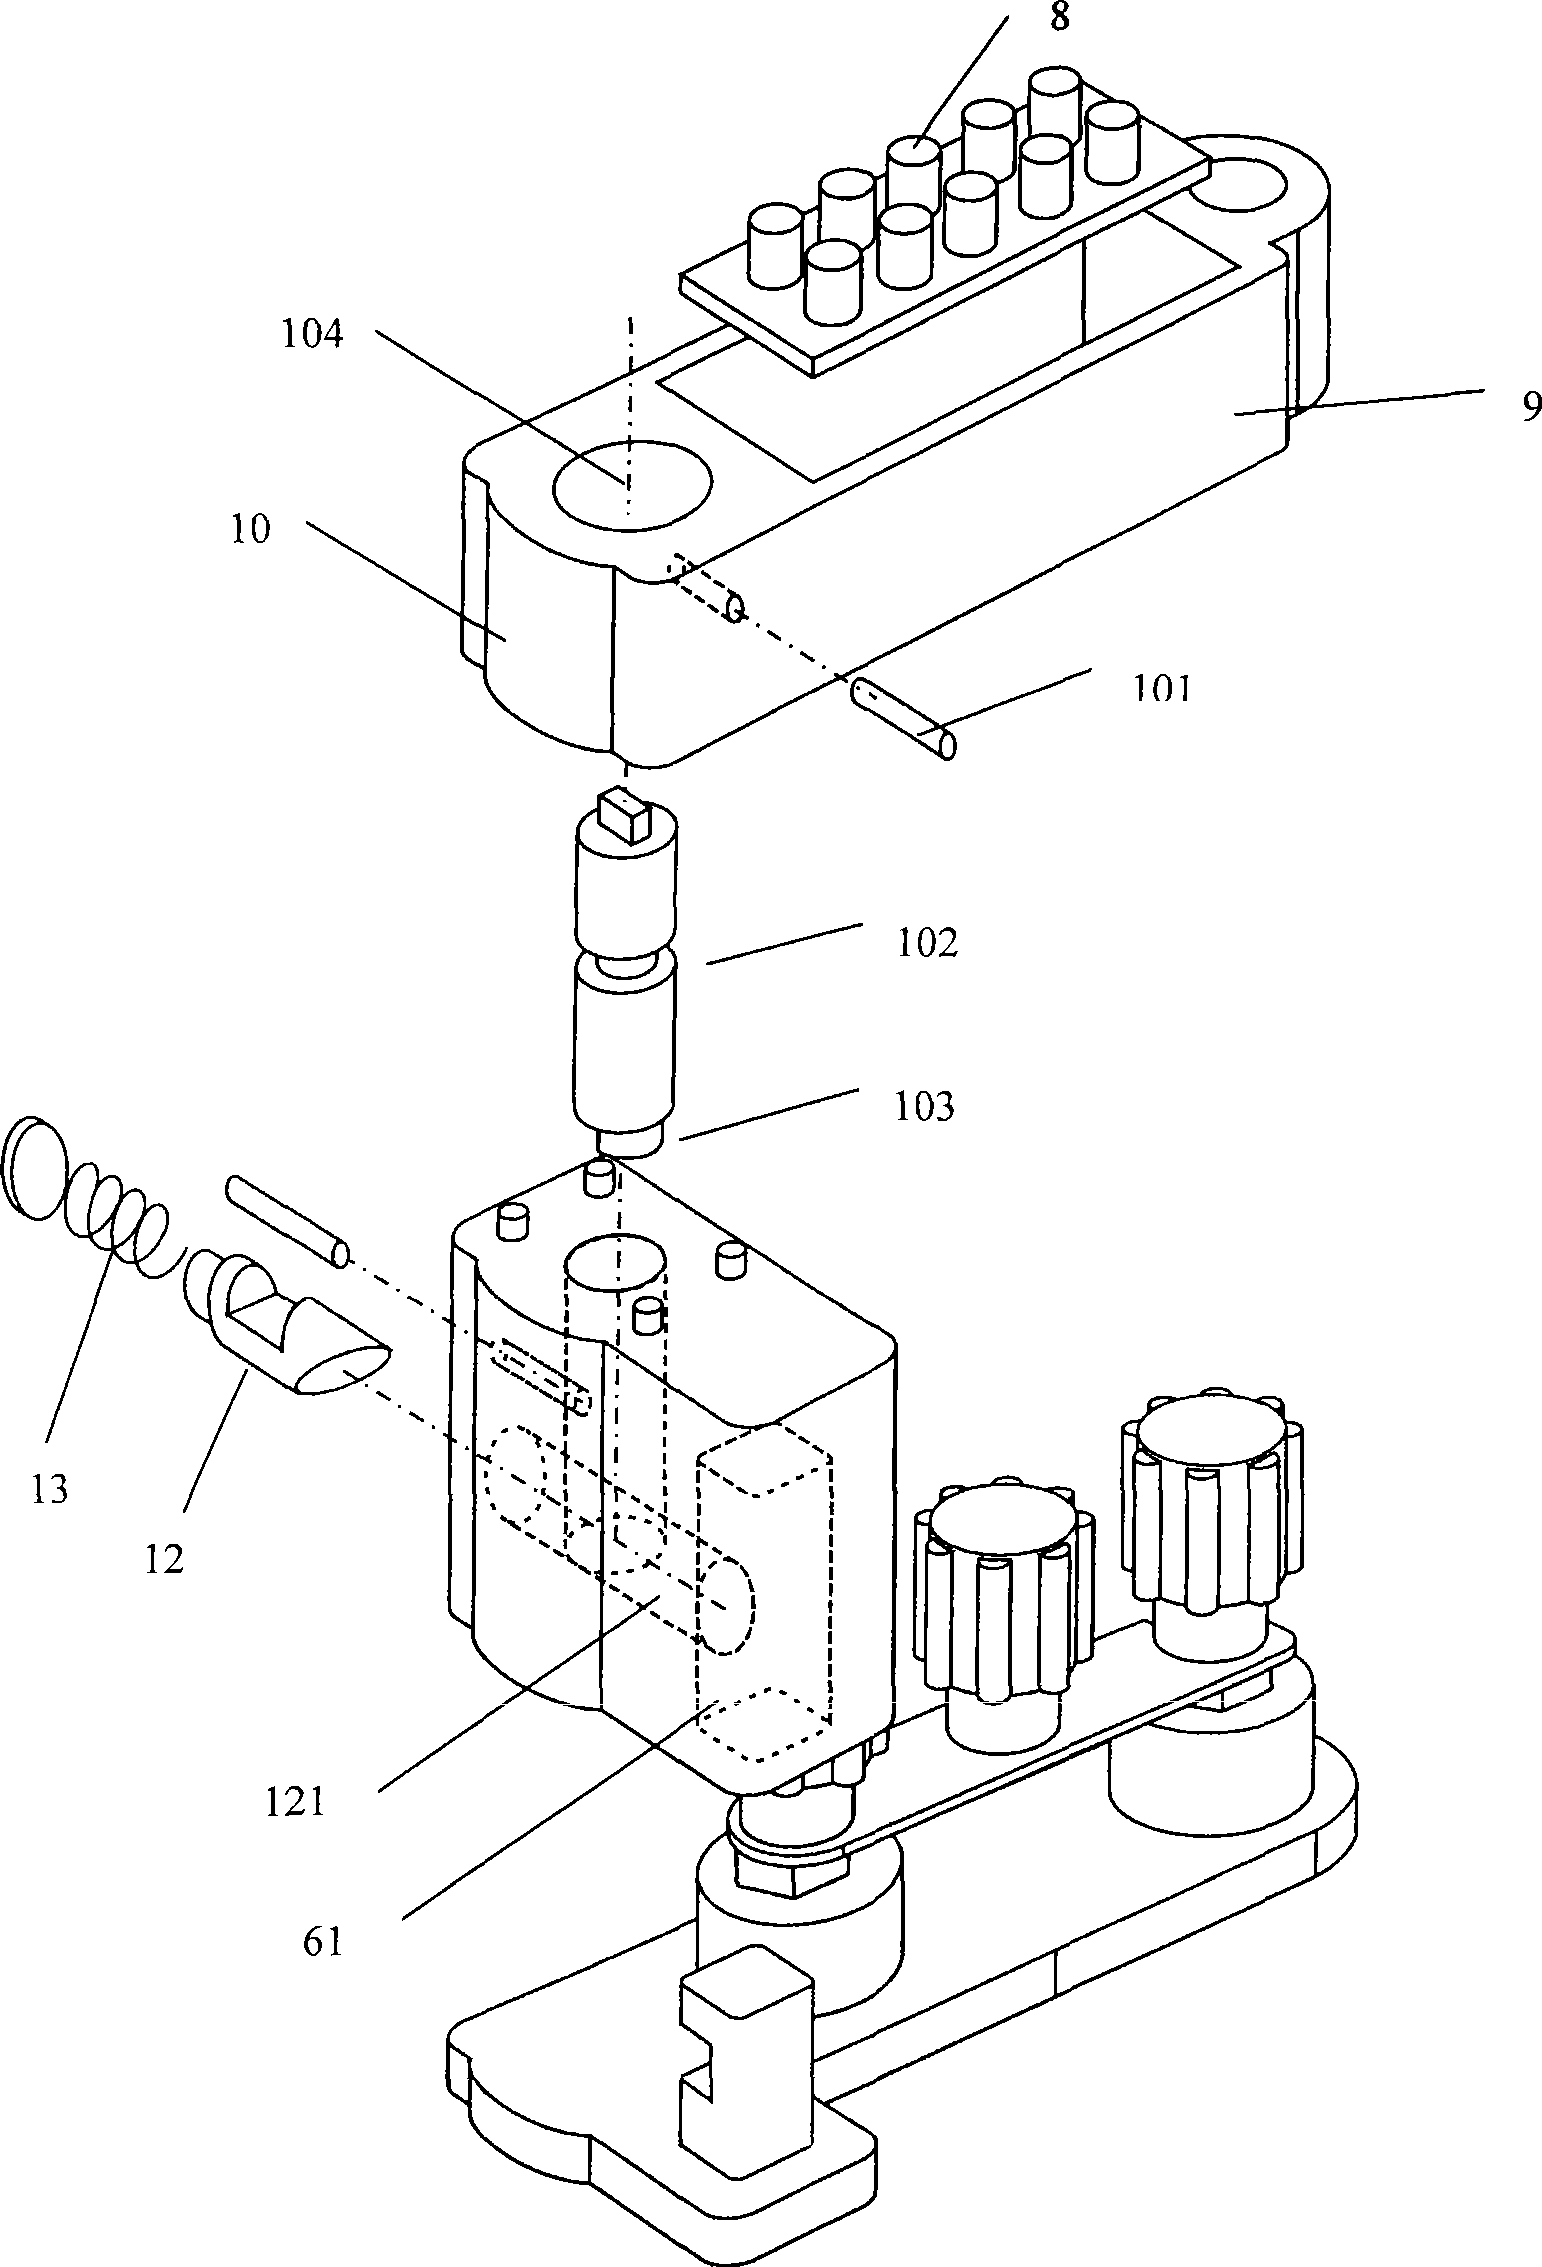 Secondary clamping board device for electrical power system relay protection